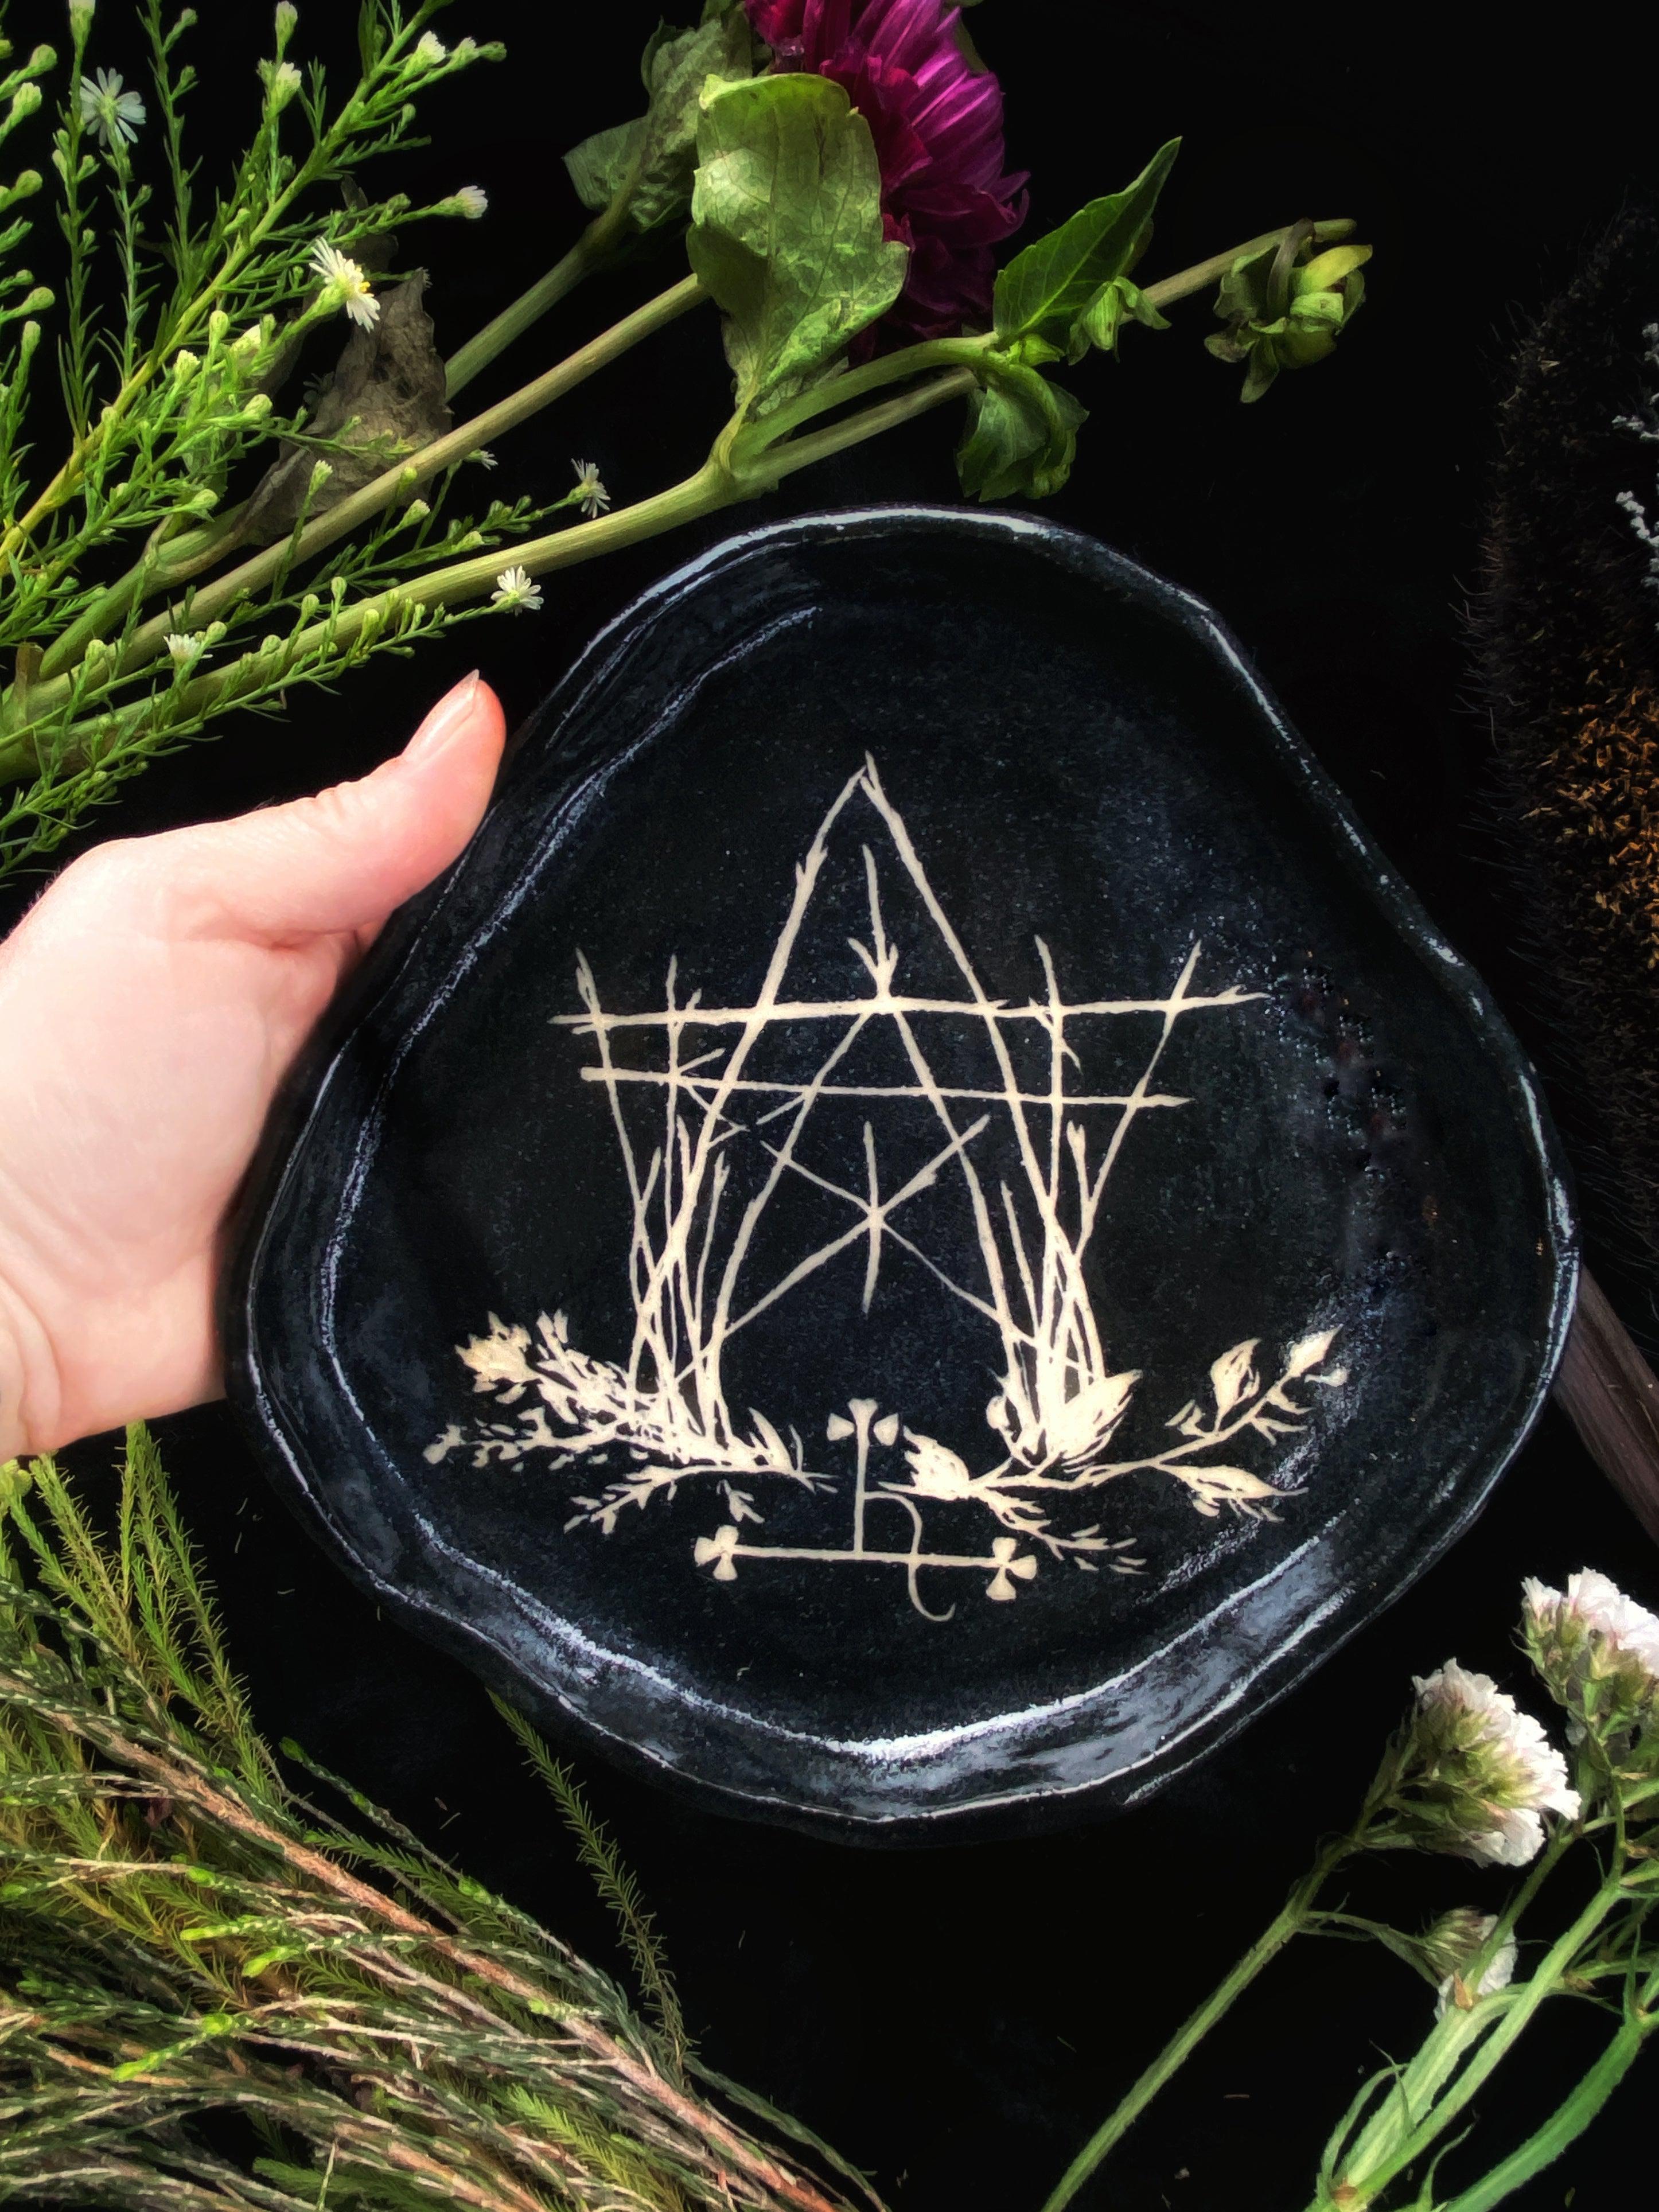 Black Sgraffito The House of Twigs Ceramic Offering Plate - Keven Craft Rituals